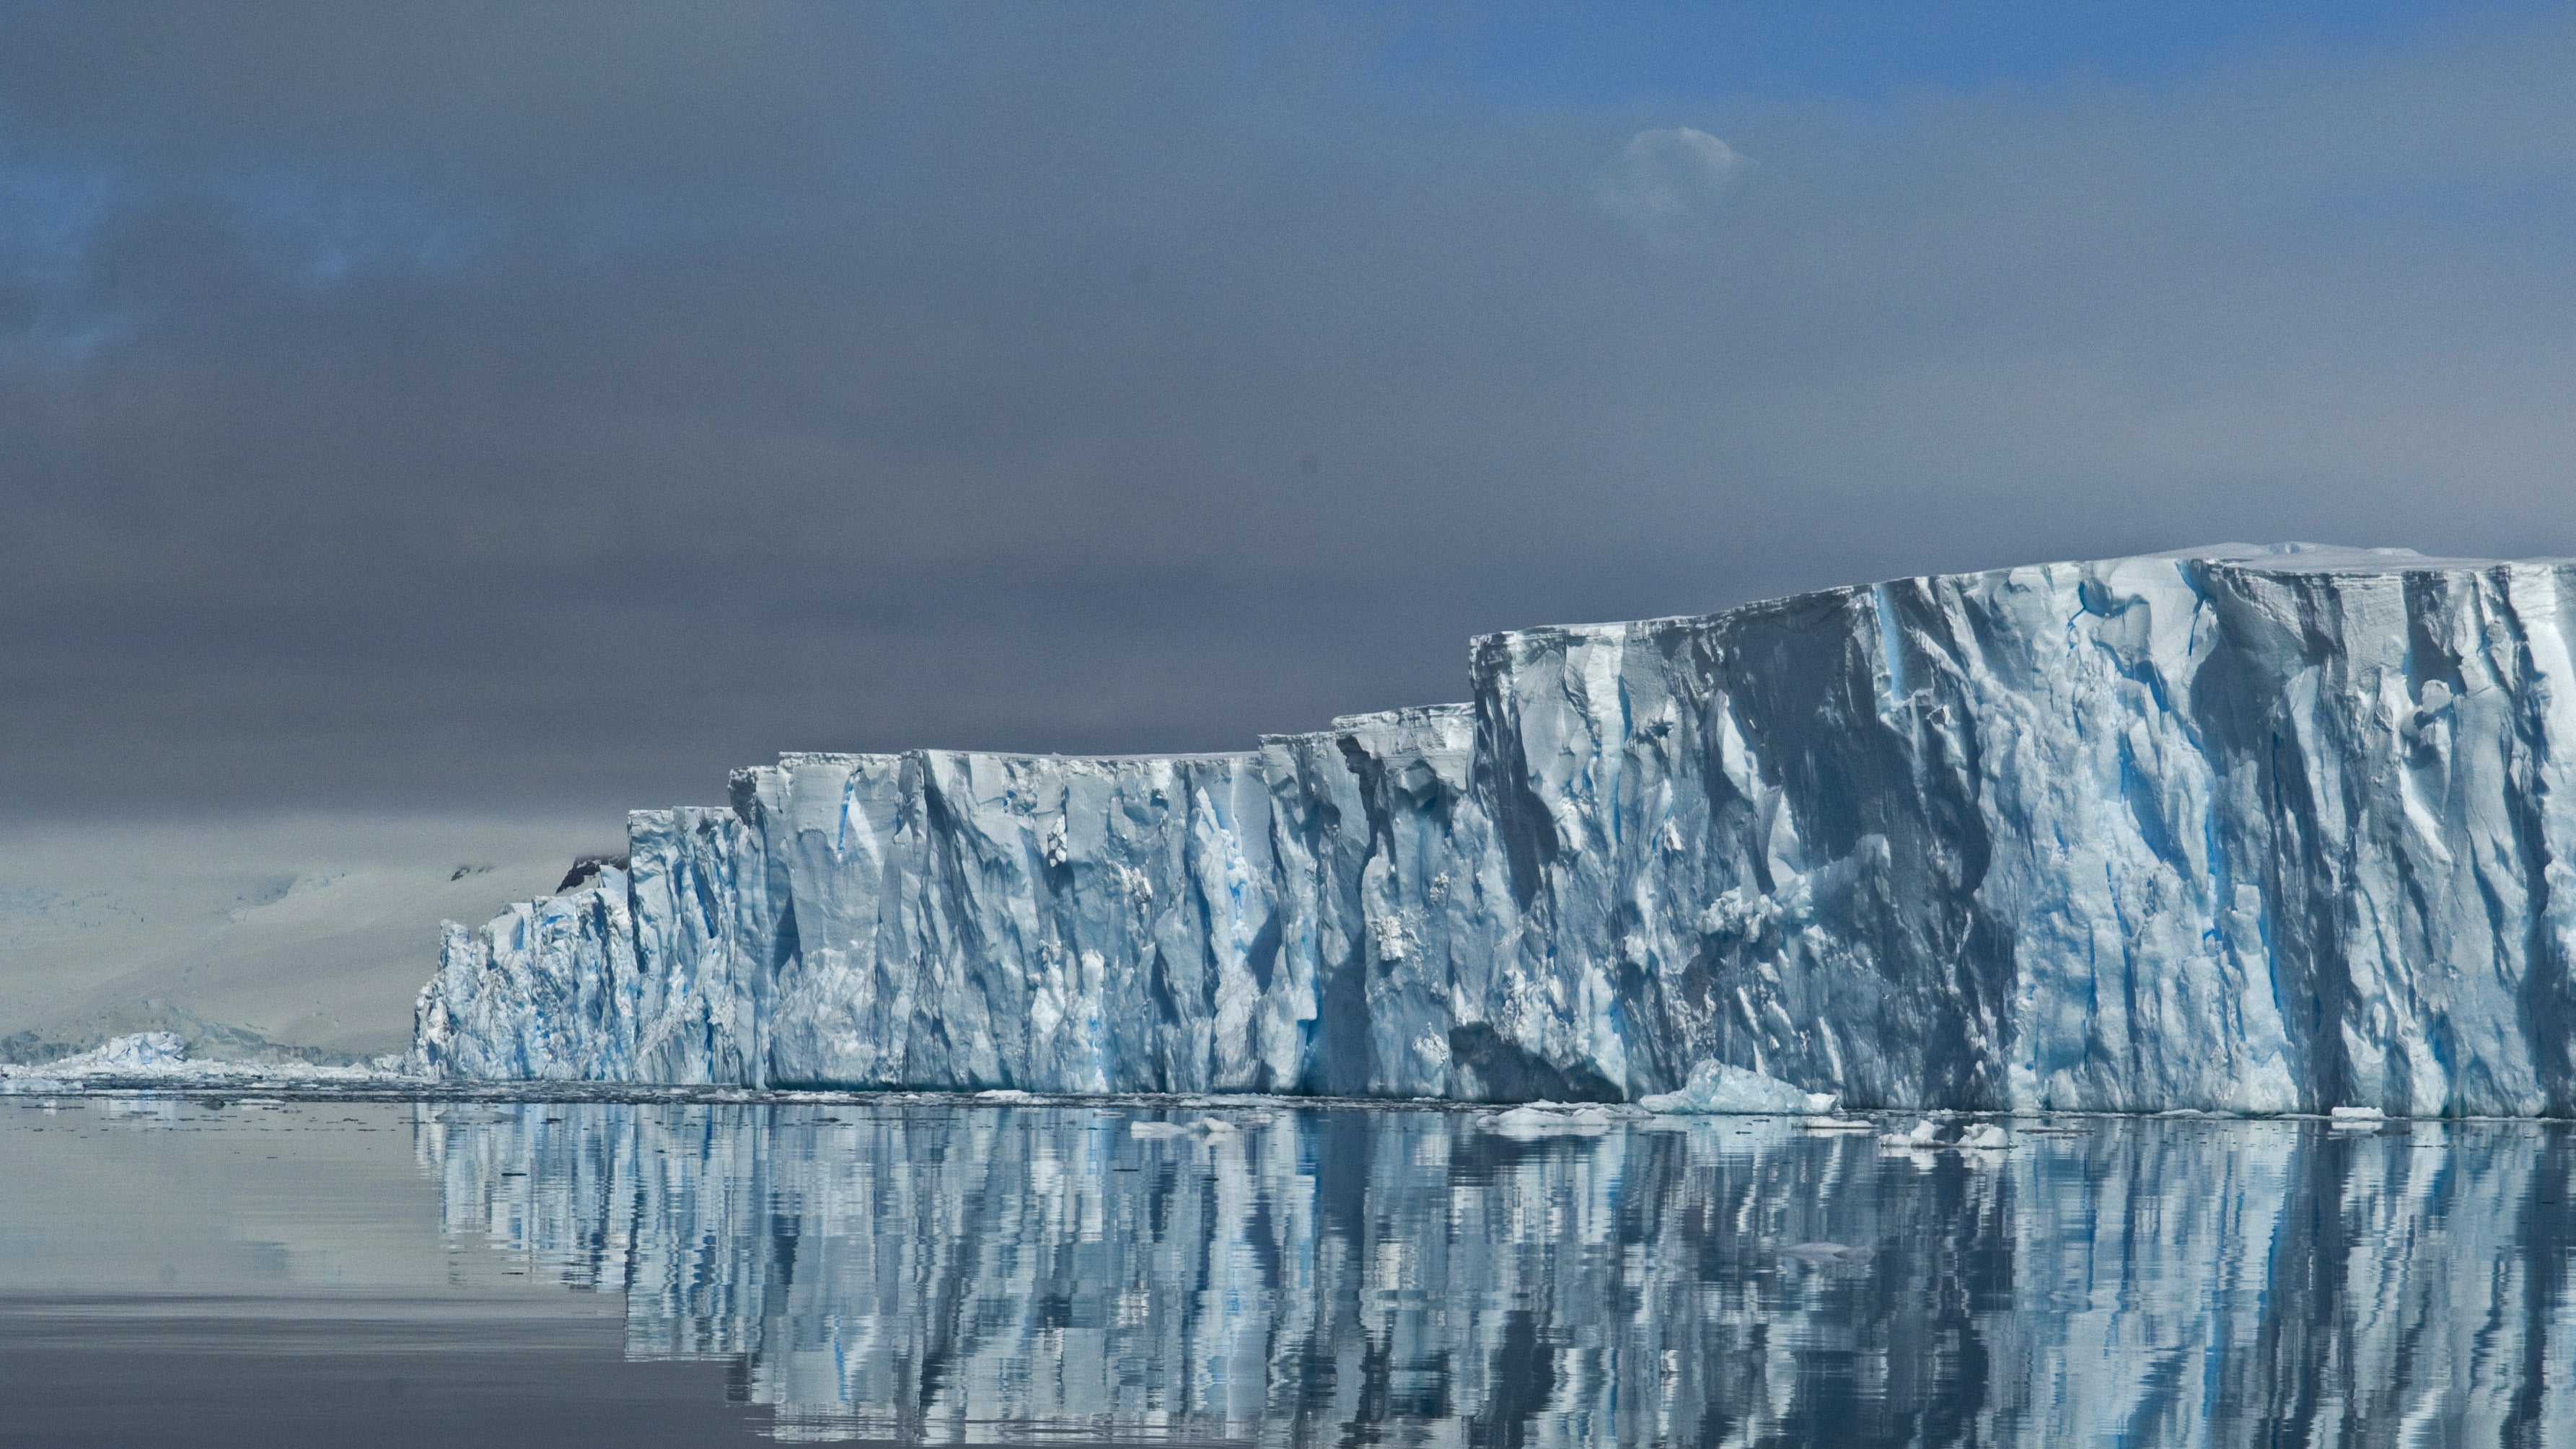 The floating ice shelf preventing the rapid disintegration of the Thwaites glacier